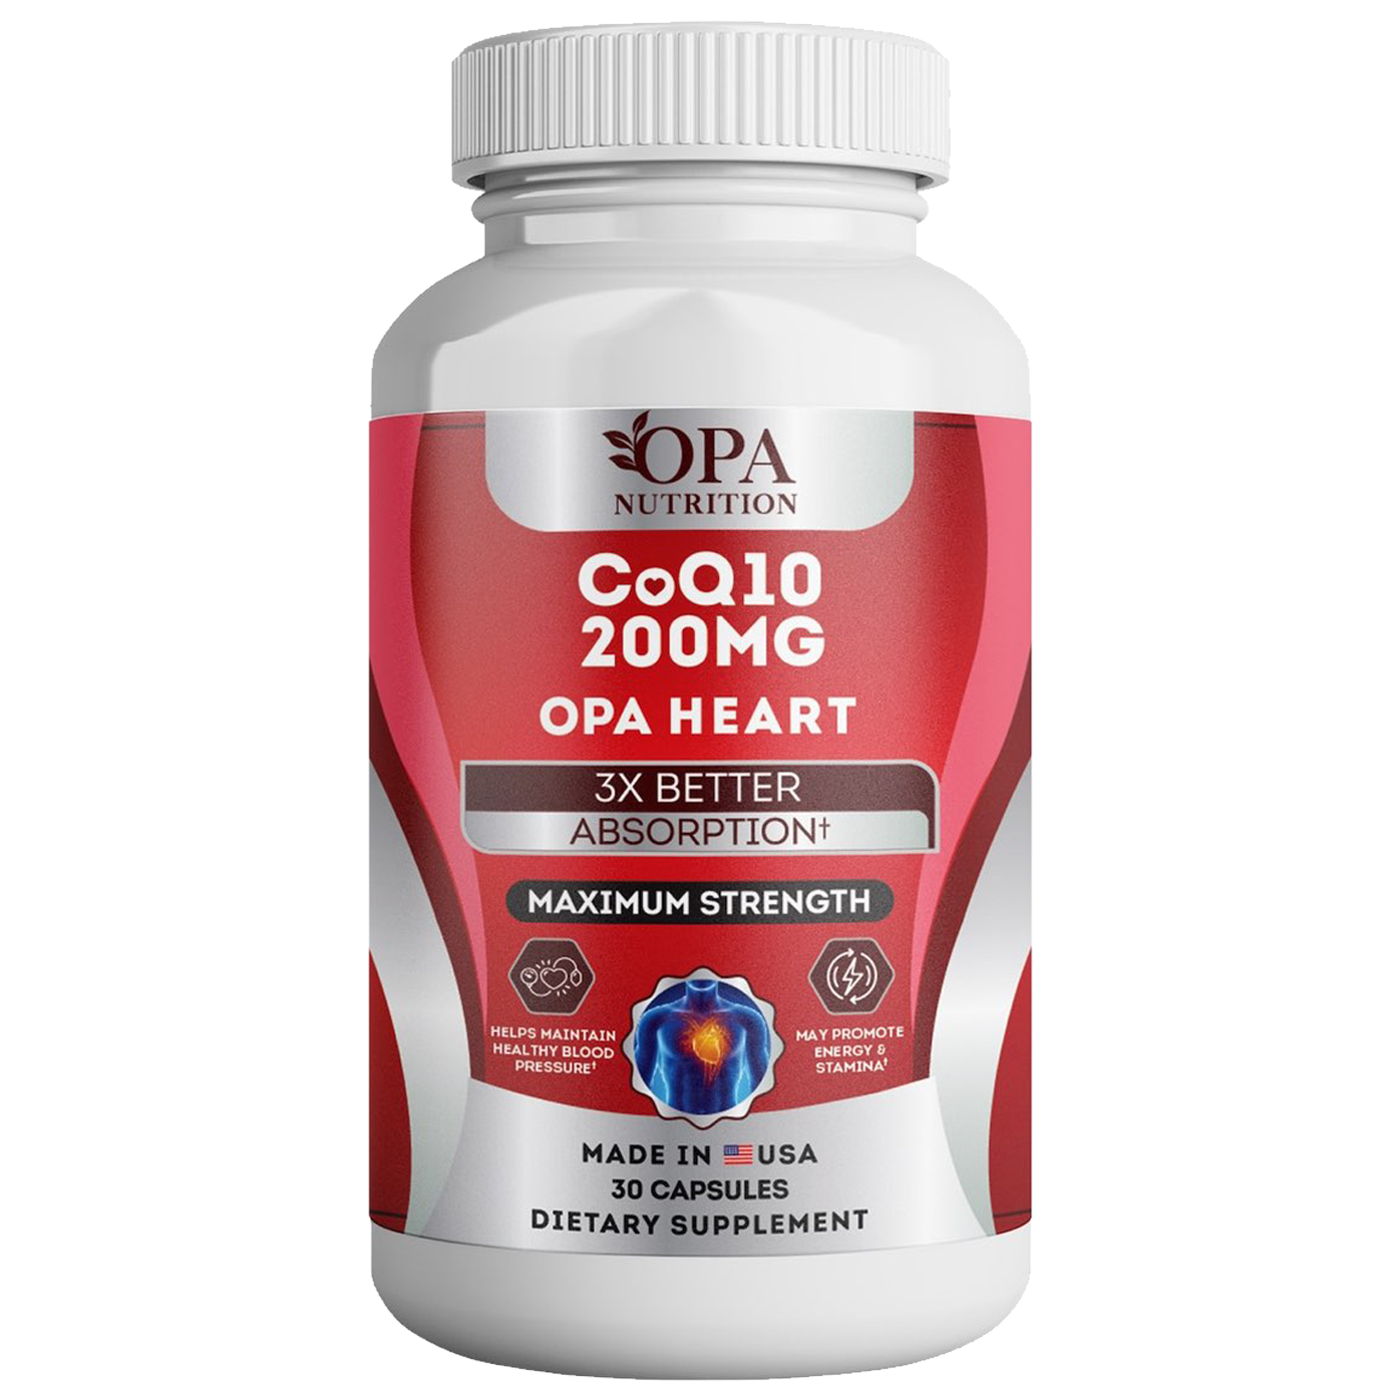 OPA HEART | Coenzyme CoQ10 200mg High Absorption Capsules - 30 Ct. Front ingredients